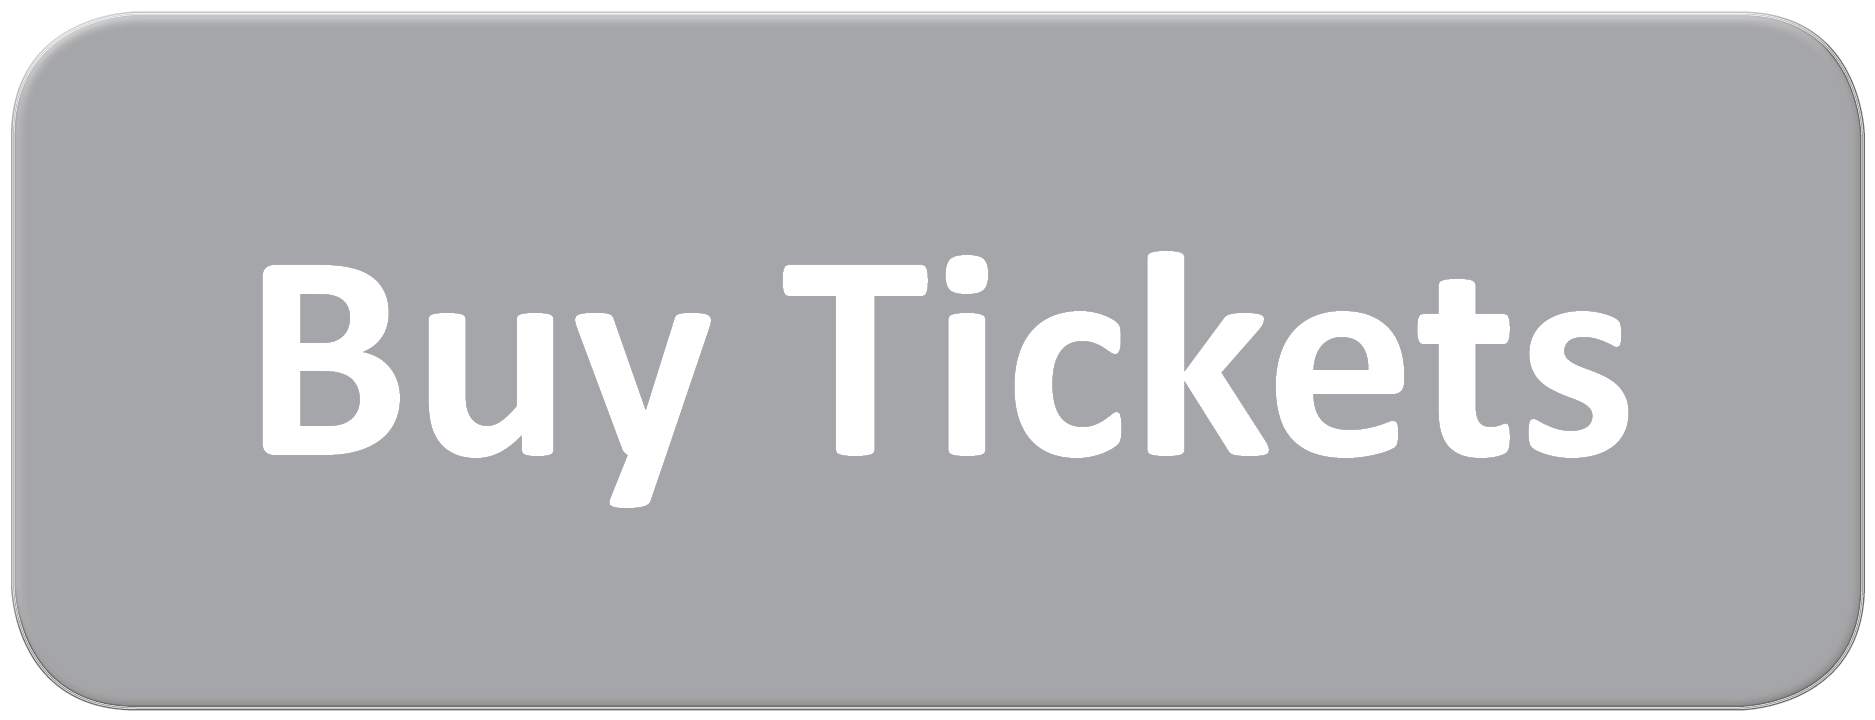 Buy Tickets Button Gray Background PNG image